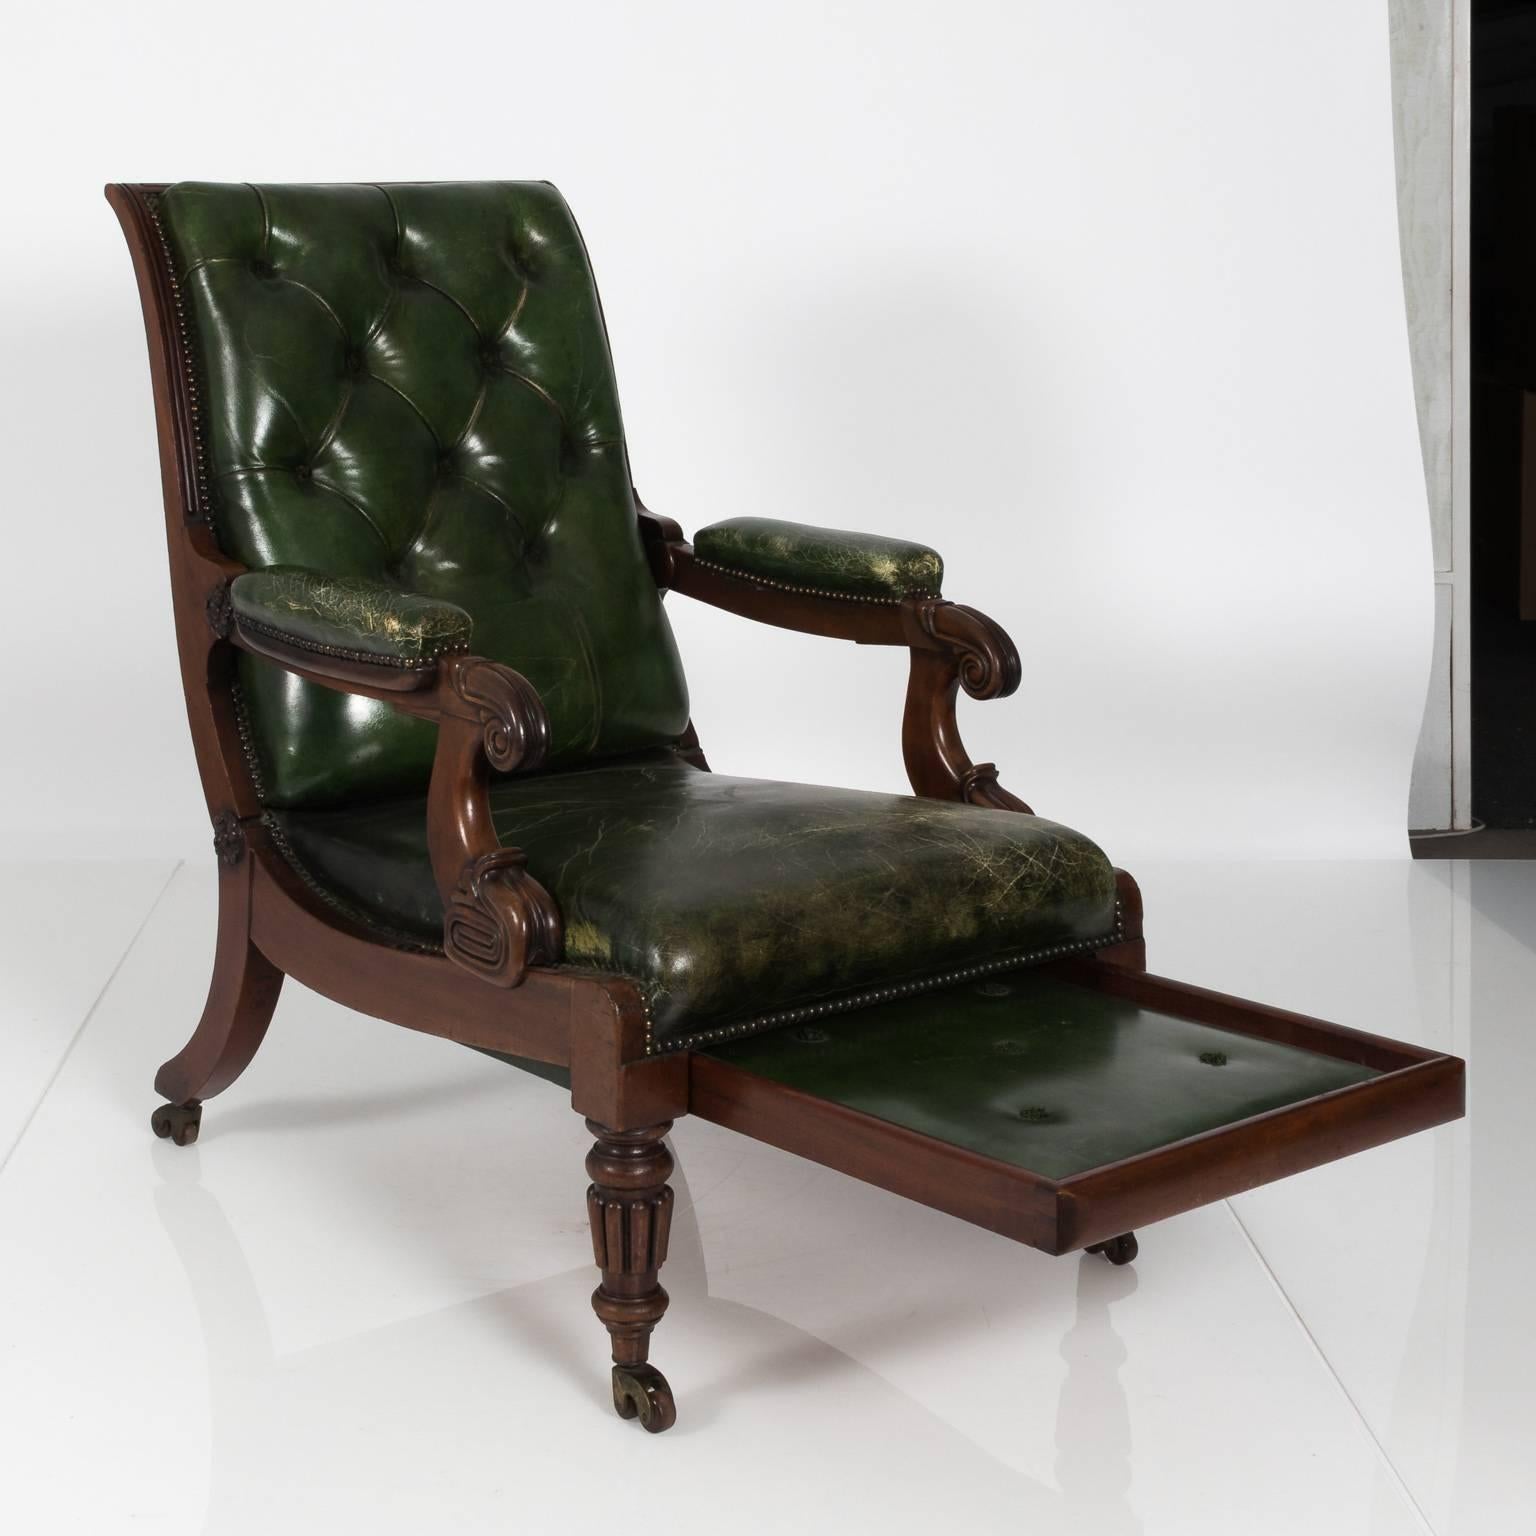 English William IV Style Green Leather Chair, circa 1840